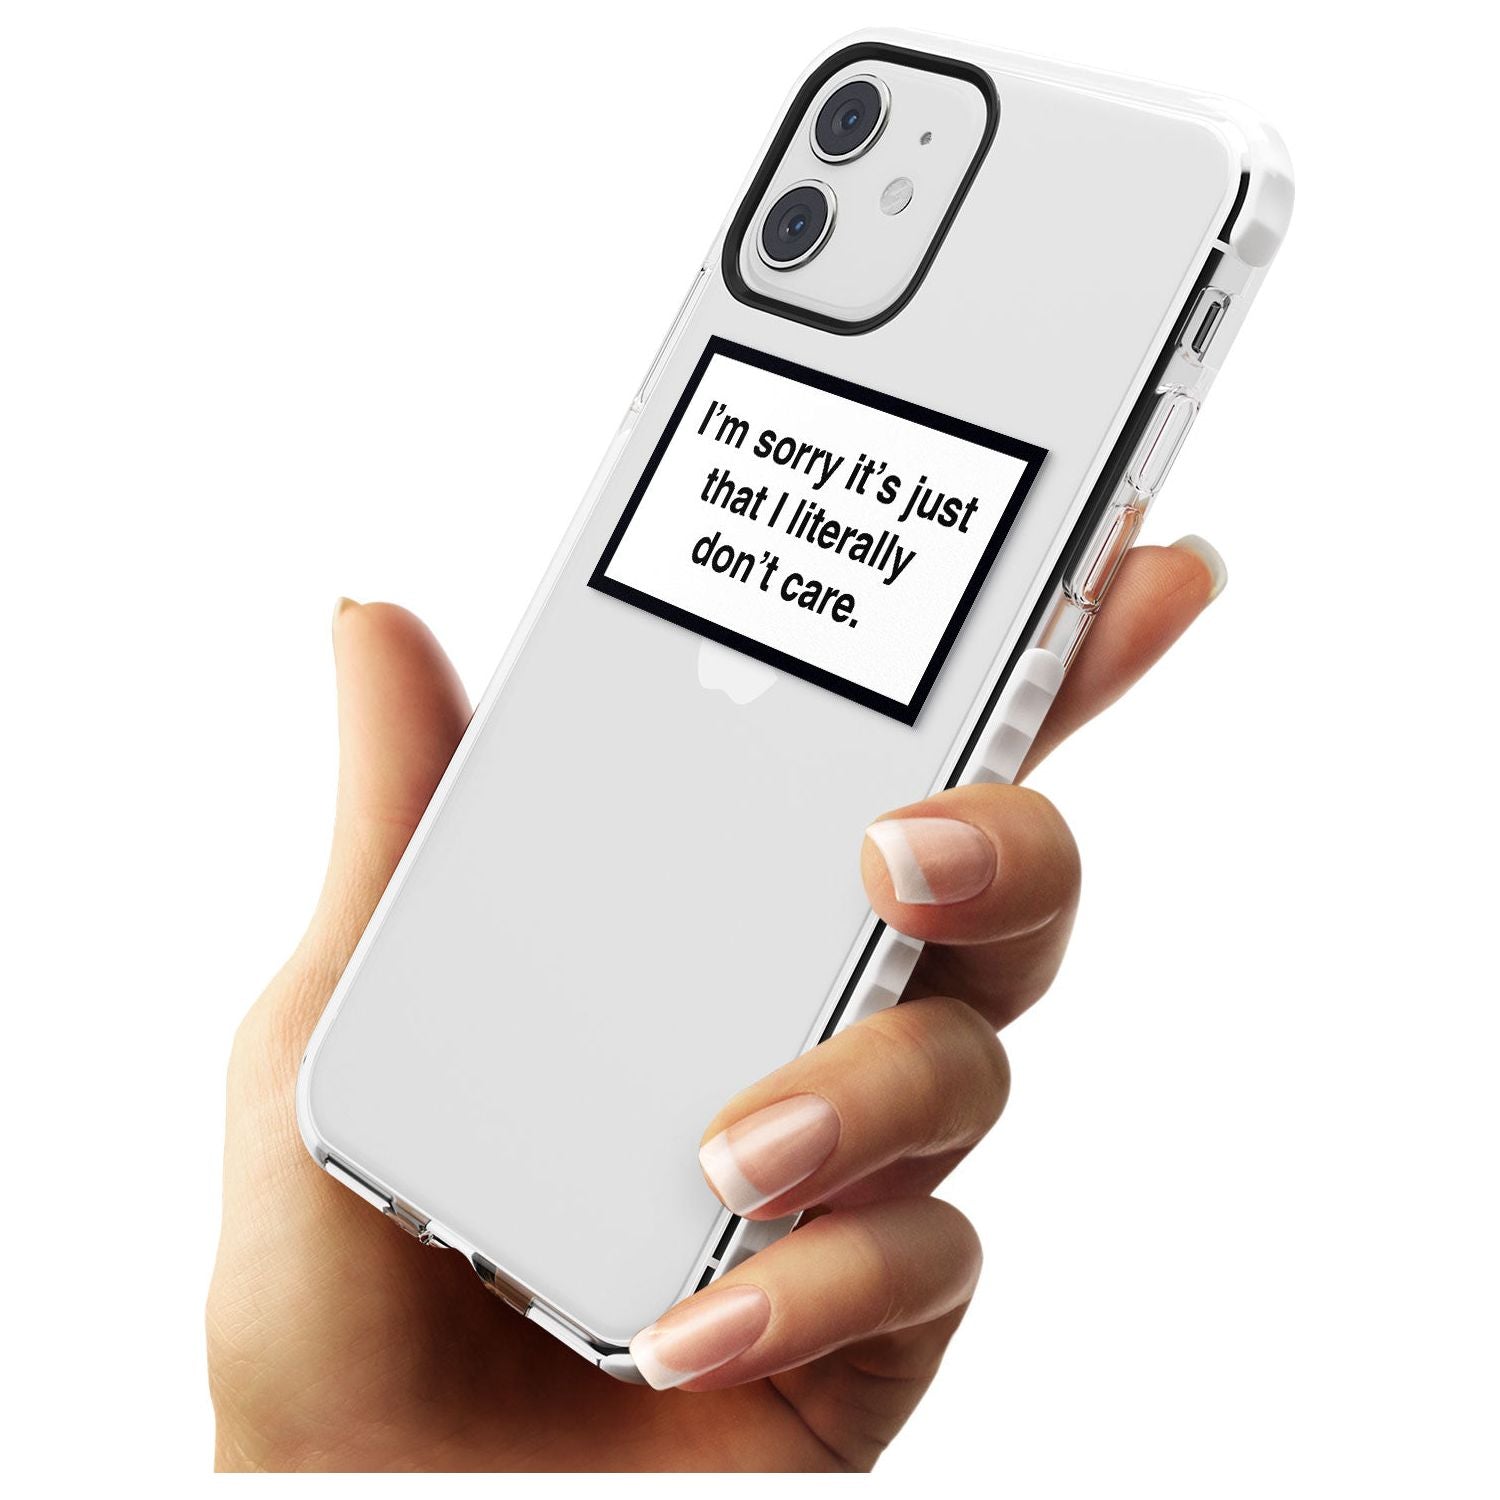 I'm sorry it's just that I literally don't care Slim TPU Phone Case for iPhone 11